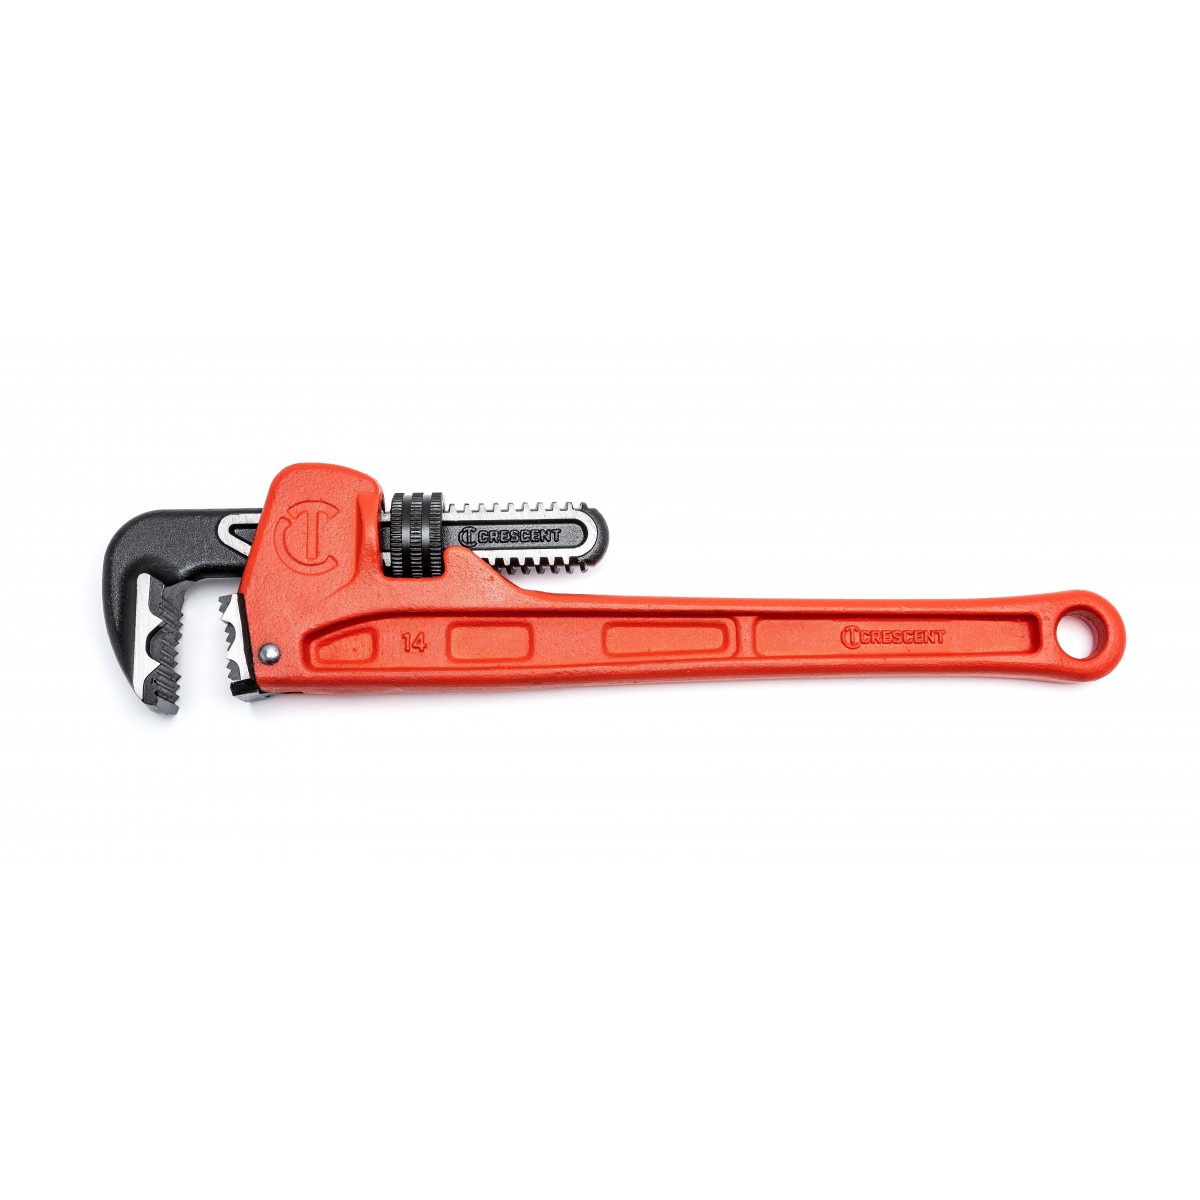 CIPW14 Pipe Wrench, 0 to 2-3/8 in Jaw, 14 in L, Cast Iron/Steel, Powder-Coated